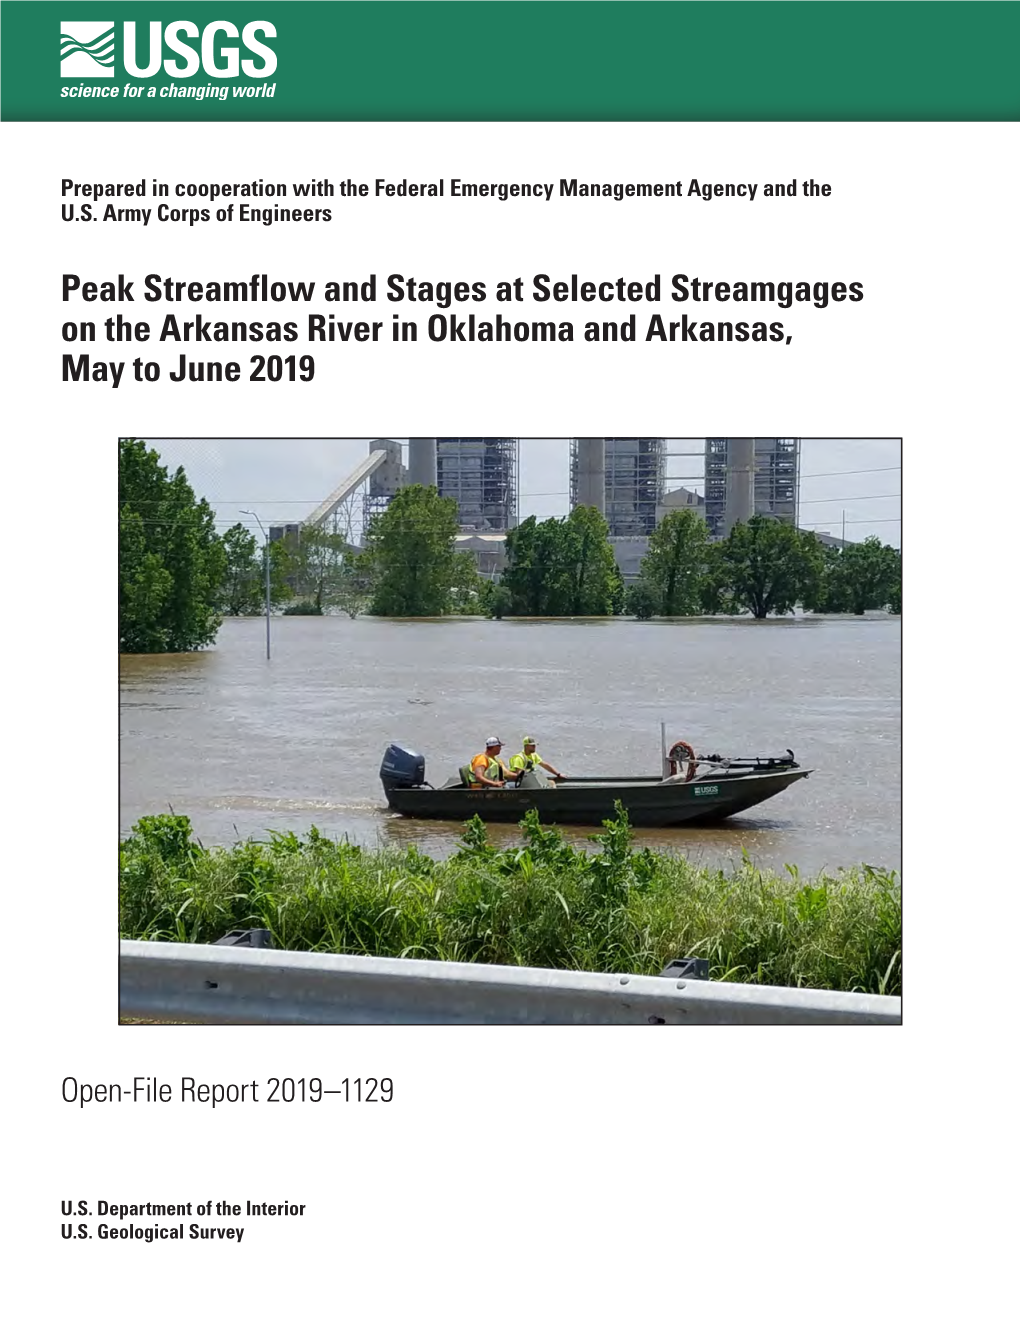 Peak Streamflow and Stages at Selected Streamgages on the Arkansas River in Oklahoma and Arkansas, May to June 2019